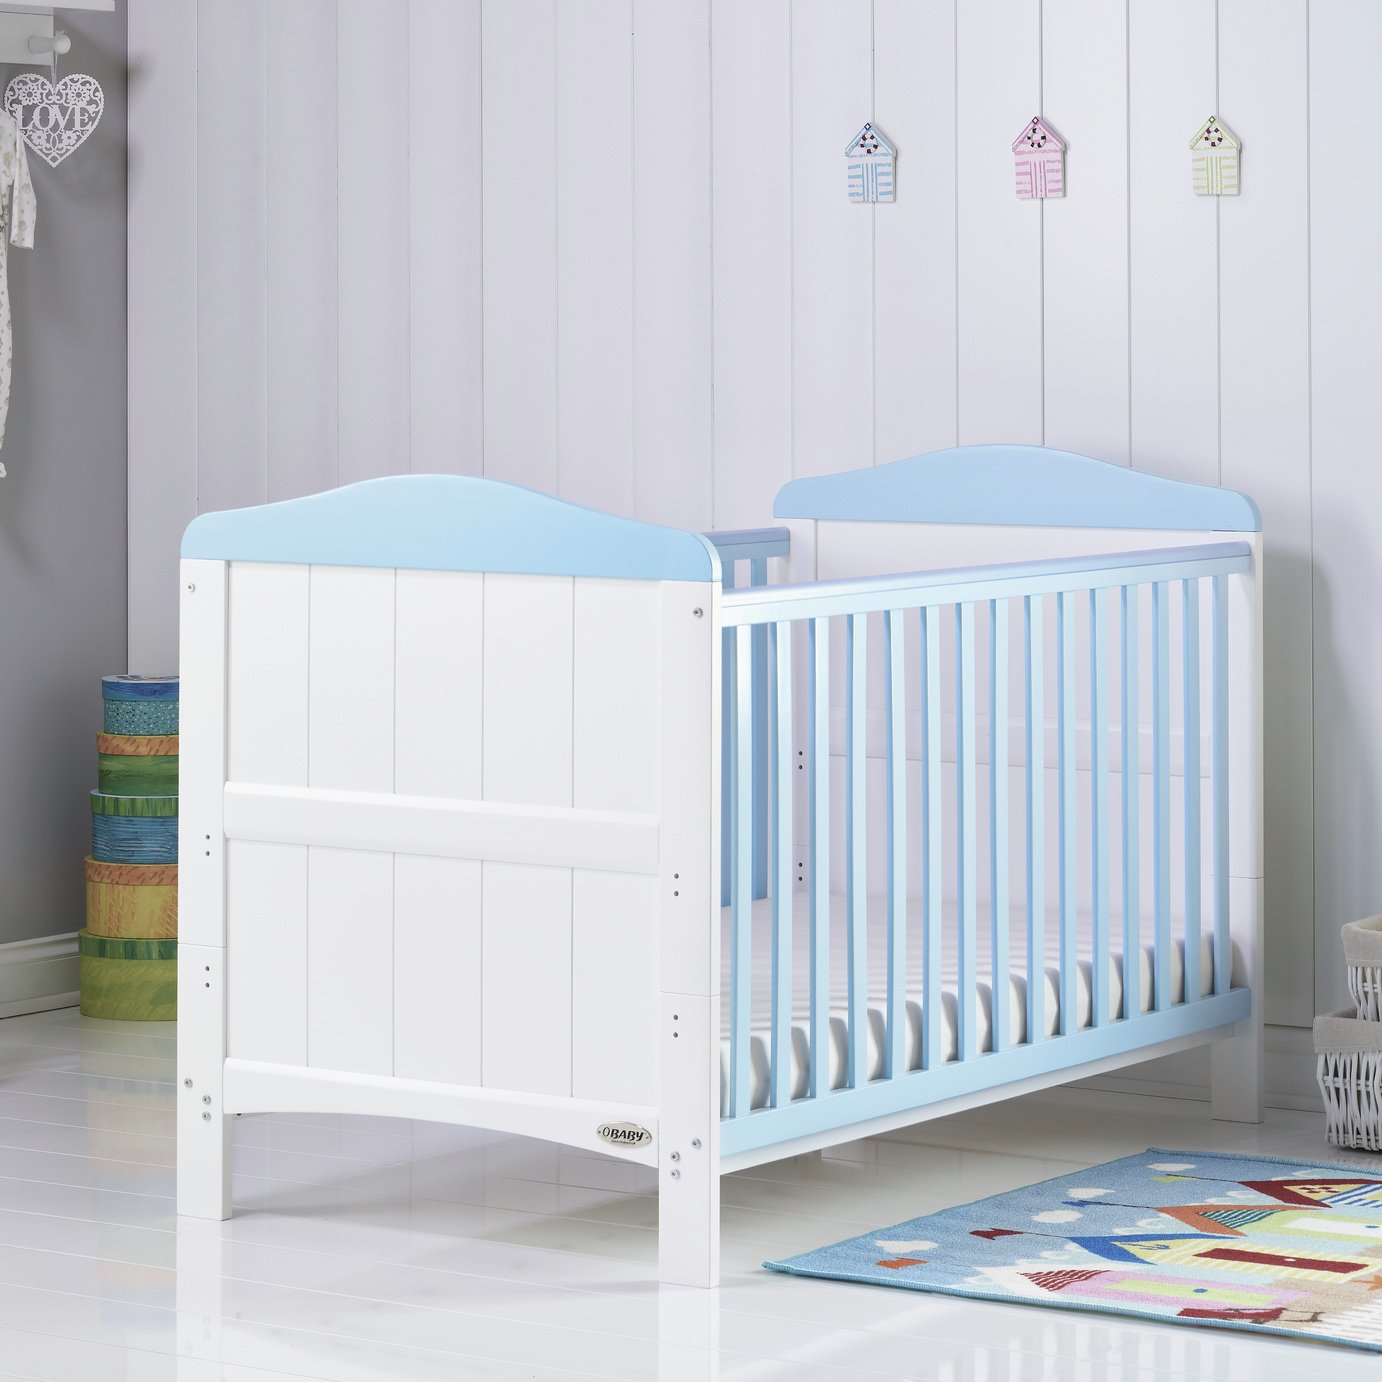 Obaby Whitby Cot Bed - White with Bonbon Blue